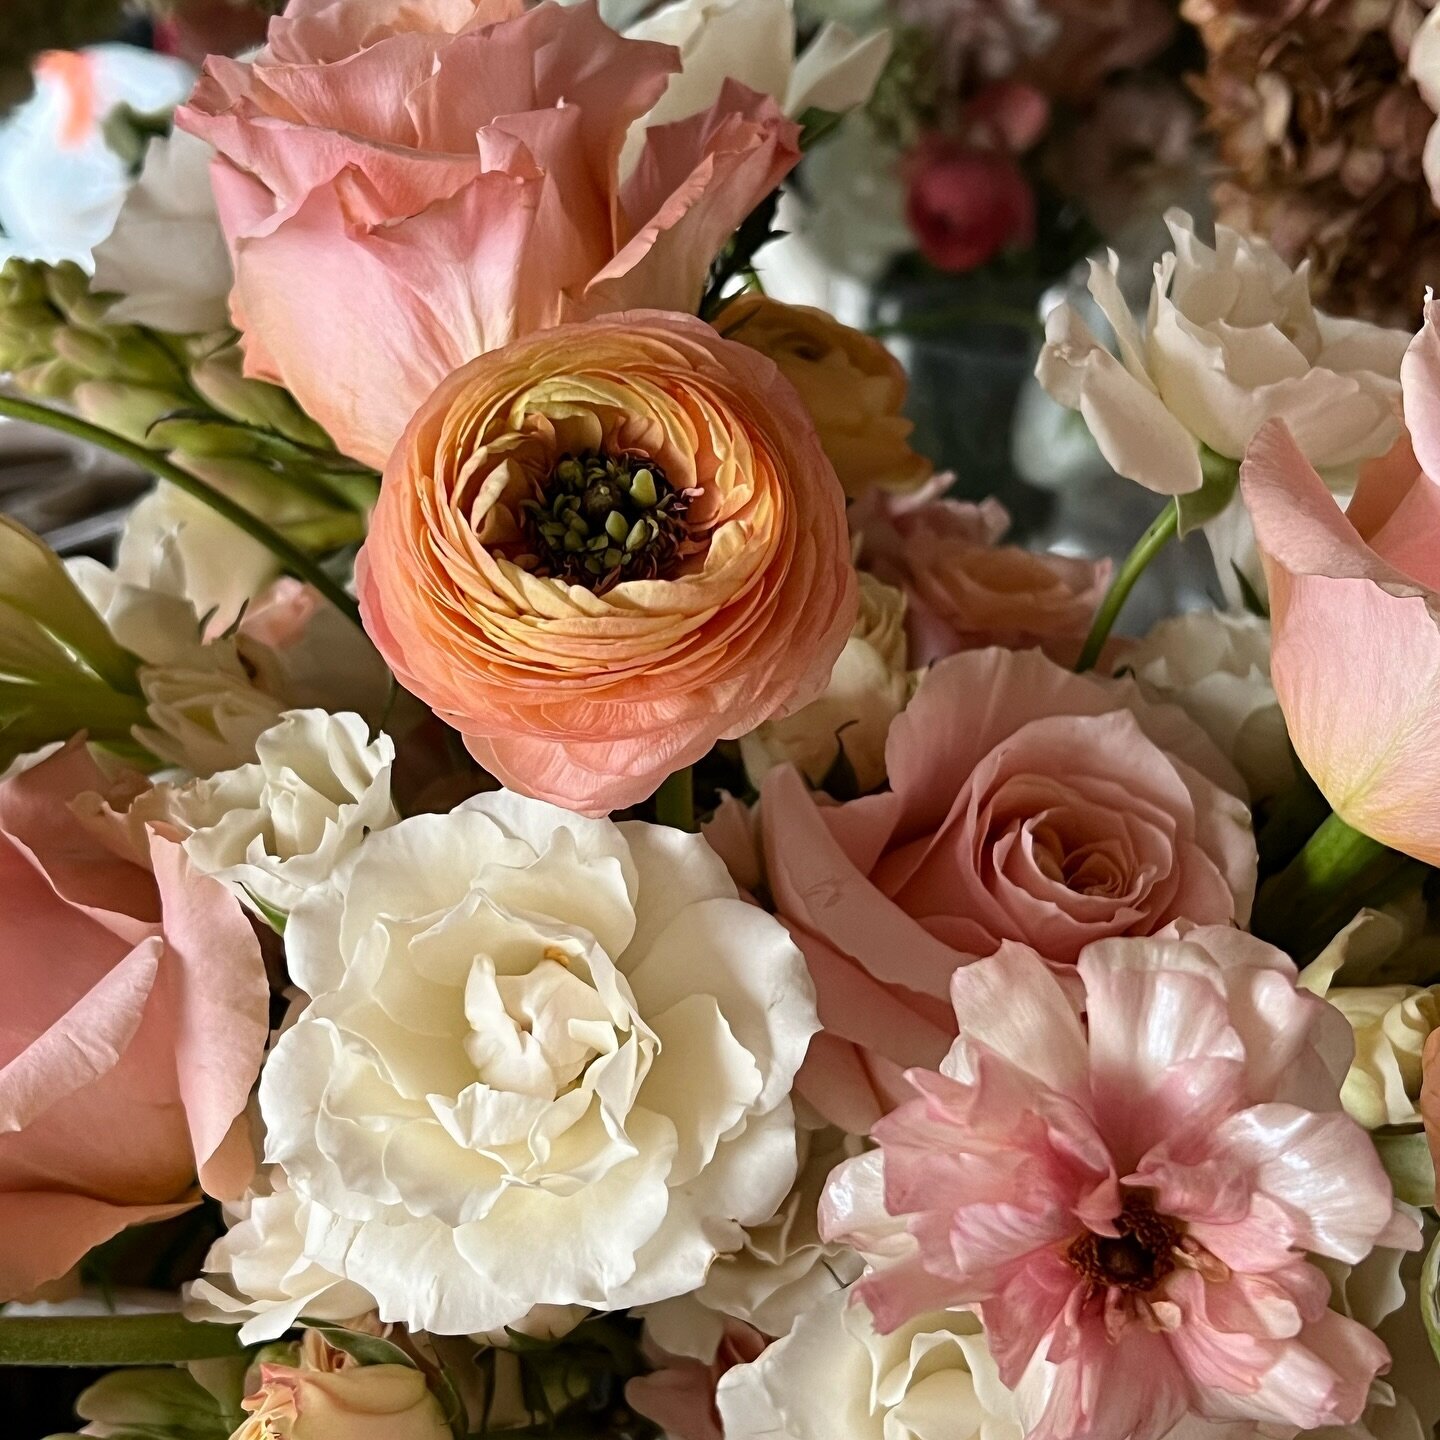 not bad for january from the local san jose flower wholesale markets! just love when the peach pastel ranunculus and butterfly ranunculus are available!

personals for matt and josephine&rsquo;s wedding tomorrow are going to shine!